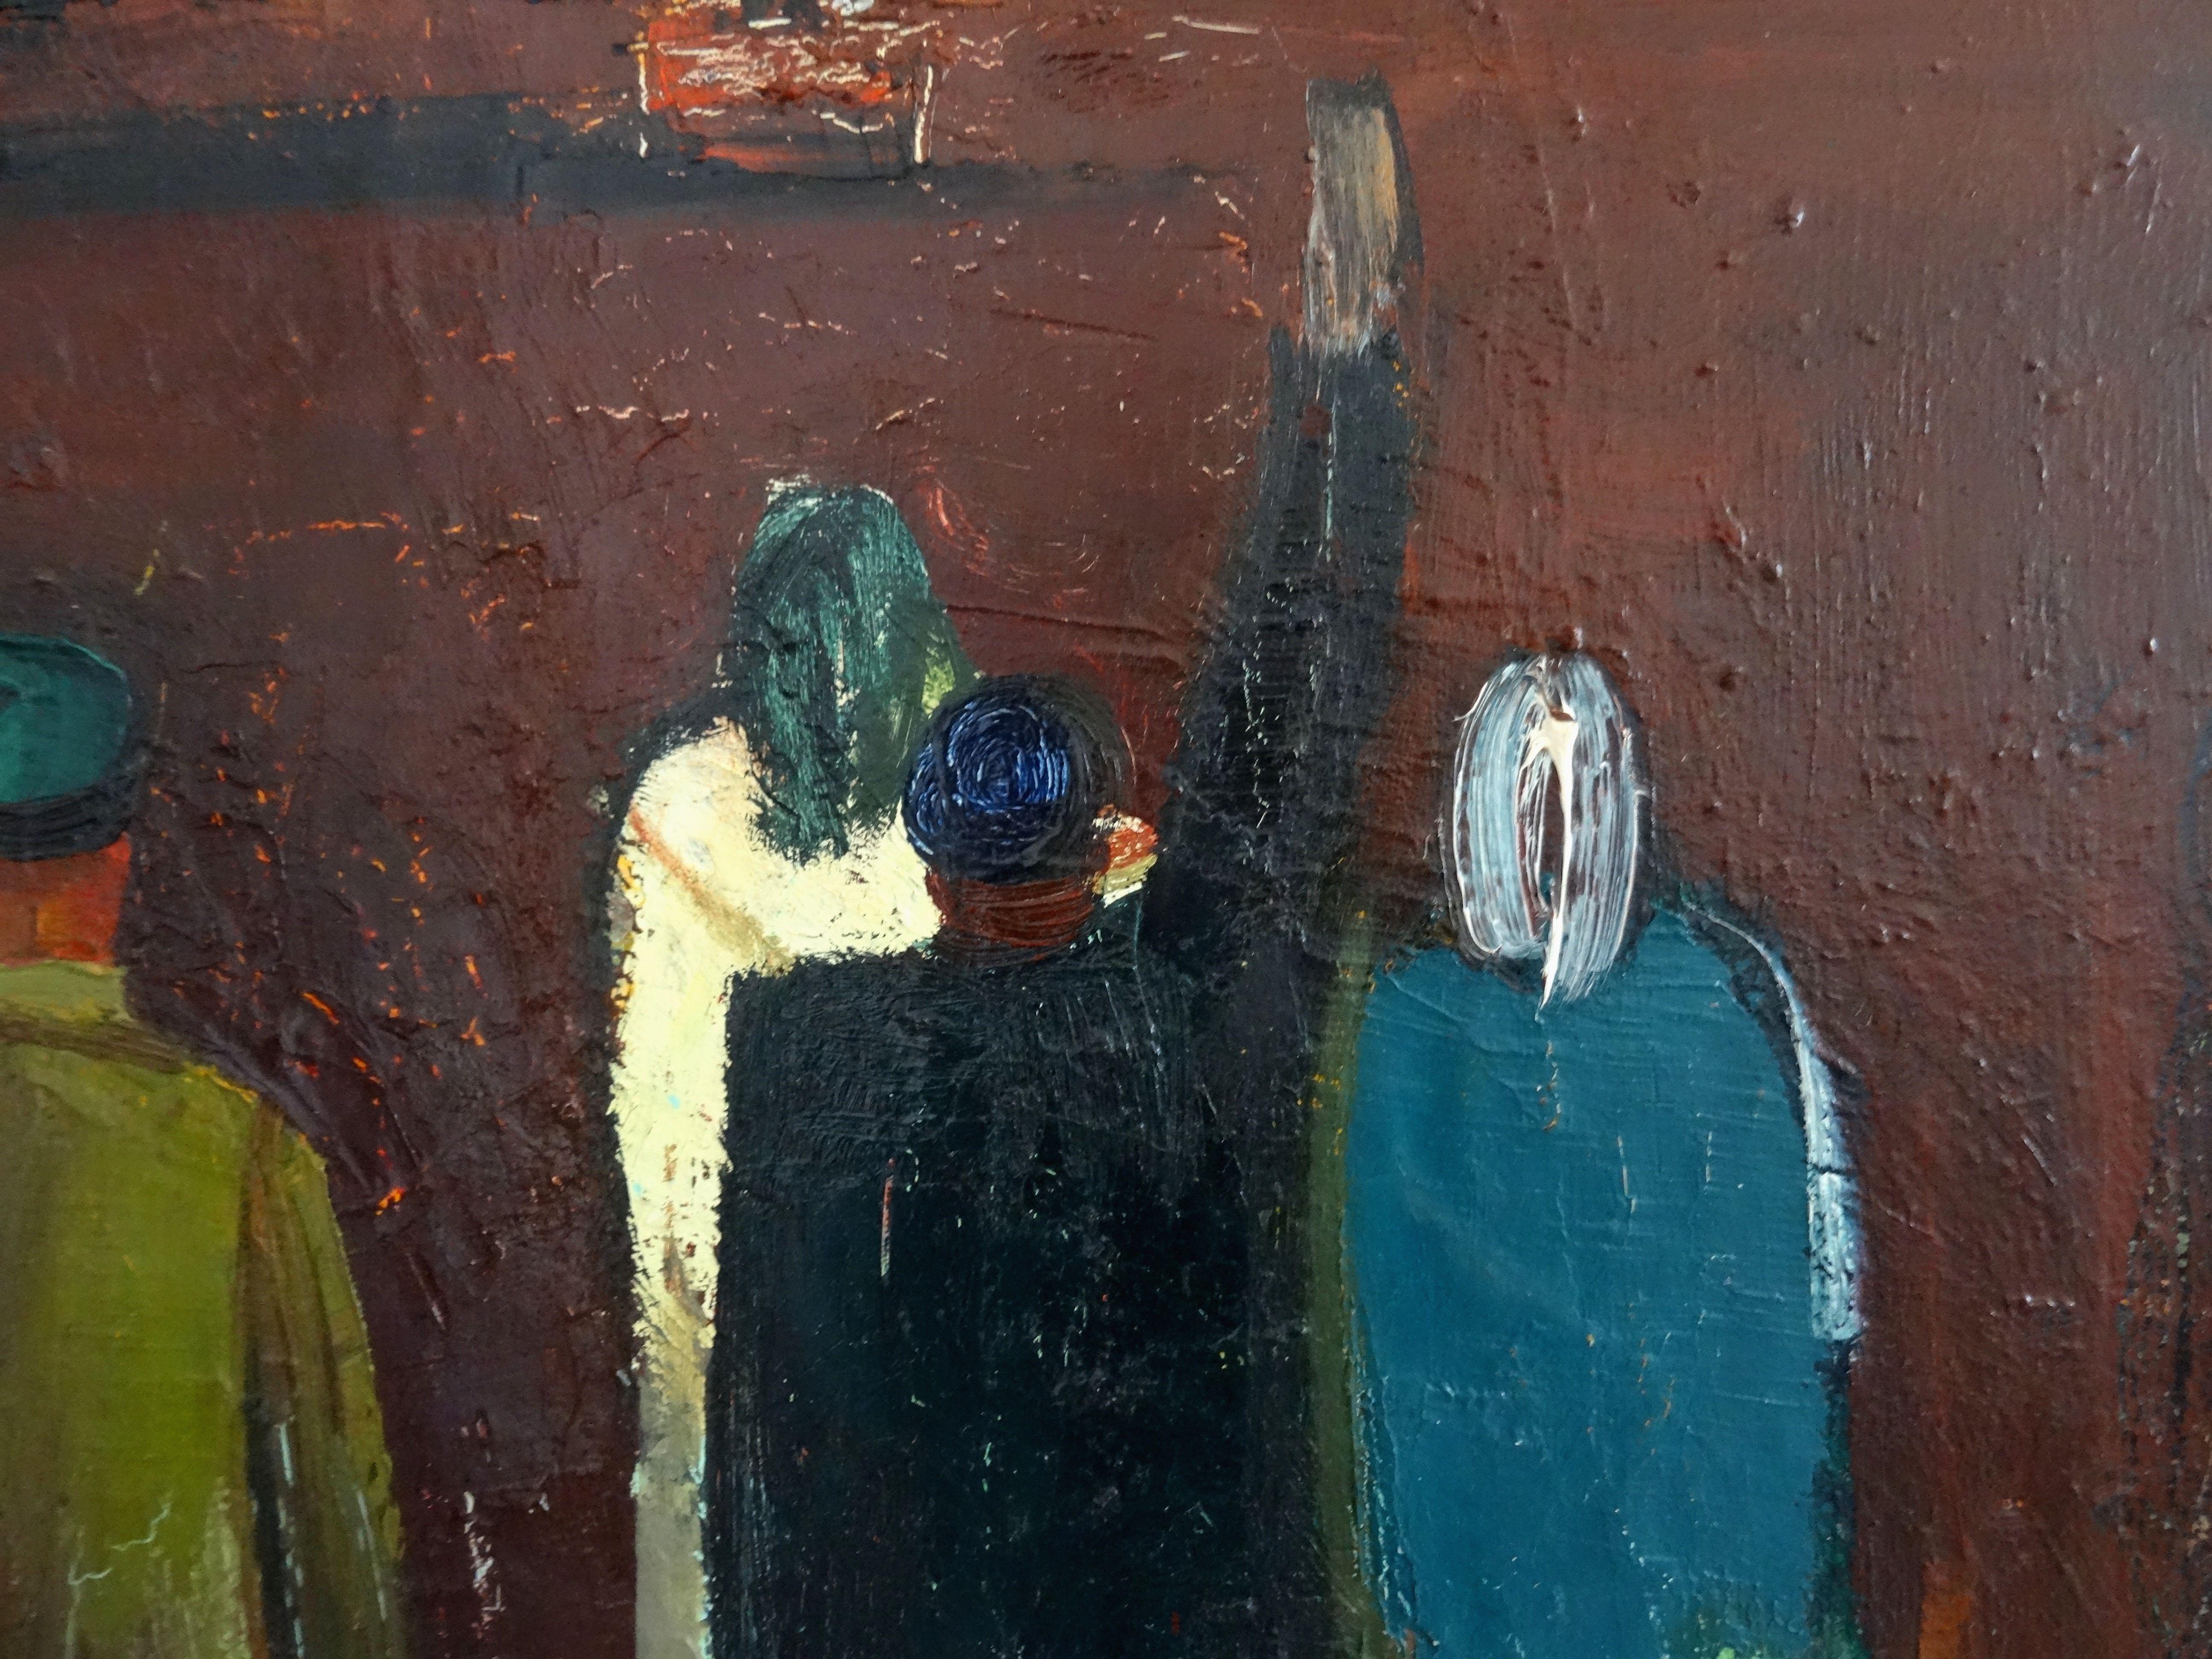 First furrow. 1980. Oil on canvas, 73x54 cm - Expressionist Painting by Aleksandr Rodin